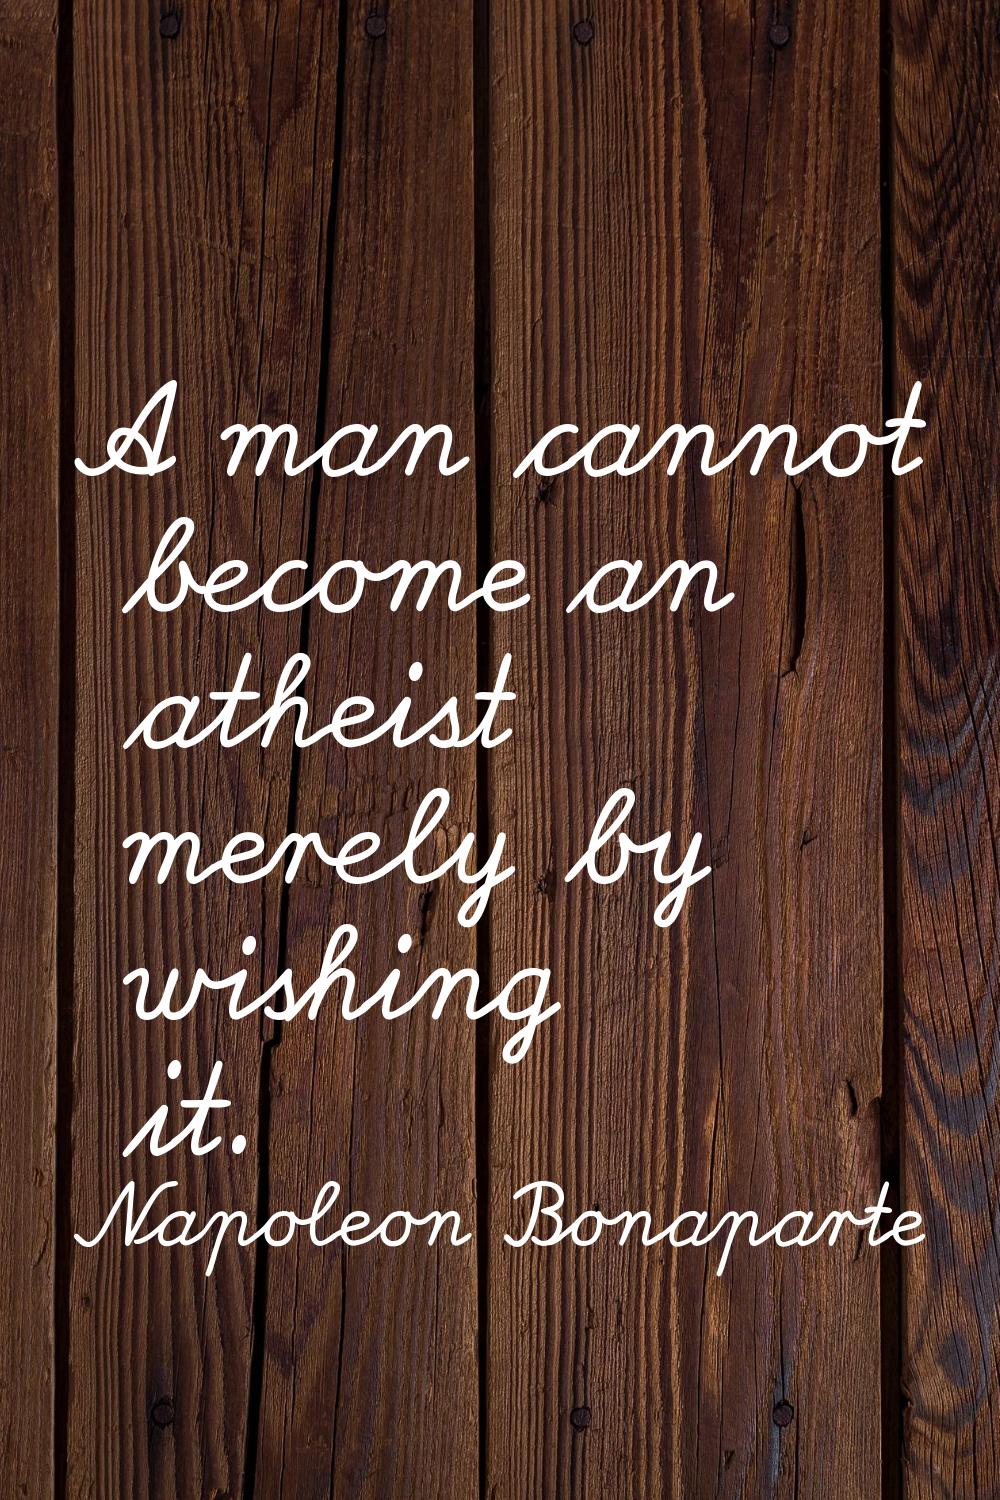 A man cannot become an atheist merely by wishing it.